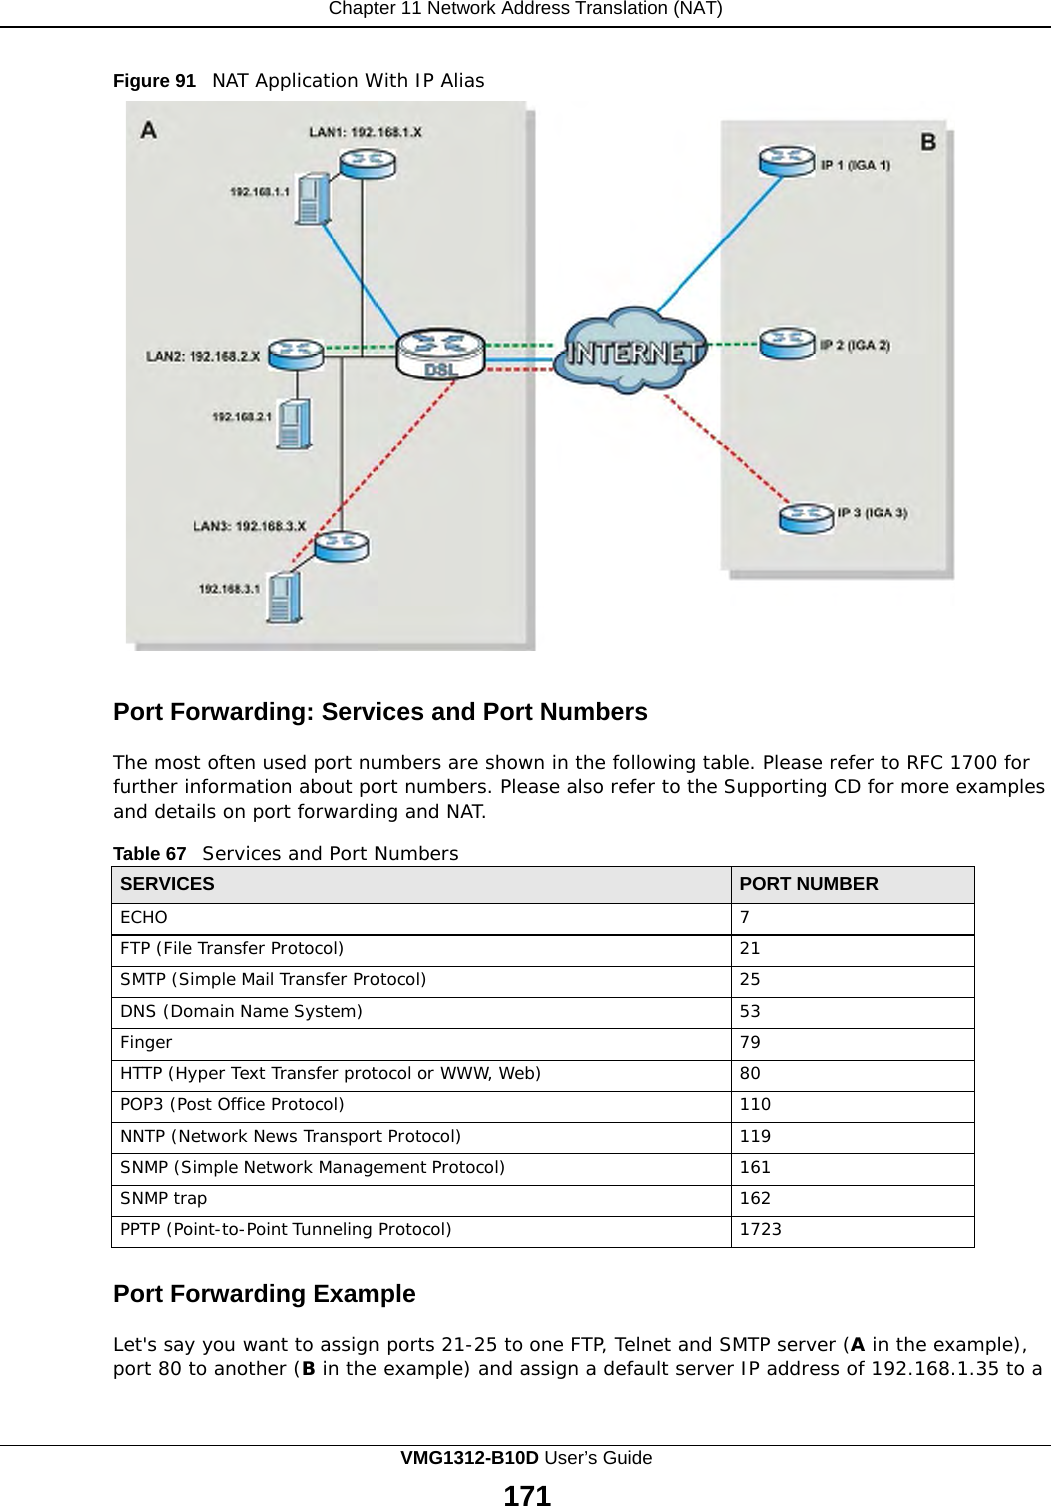 Chapter 11 Network Address Translation (NAT)    Figure 91   NAT Application With IP Alias    Port Forwarding: Services and Port Numbers  The most often used port numbers are shown in the following table. Please refer to RFC 1700 for further information about port numbers. Please also refer to the Supporting CD for more examples and details on port forwarding and NAT.  Table 67   Services and Port Numbers  SERVICES PORT NUMBER ECHO 7 FTP (File Transfer Protocol) 21 SMTP (Simple Mail Transfer Protocol) 25 DNS (Domain Name System) 53 Finger 79 HTTP (Hyper Text Transfer protocol or WWW, Web) 80 POP3 (Post Office Protocol) 110 NNTP (Network News Transport Protocol) 119 SNMP (Simple Network Management Protocol) 161 SNMP trap 162 PPTP (Point-to-Point Tunneling Protocol) 1723  Port Forwarding Example  Let&apos;s say you want to assign ports 21-25 to one FTP, Telnet and SMTP server (A in the example), port 80 to another (B in the example) and assign a default server IP address of 192.168.1.35 to a VMG1312-B10D User’s Guide 171  